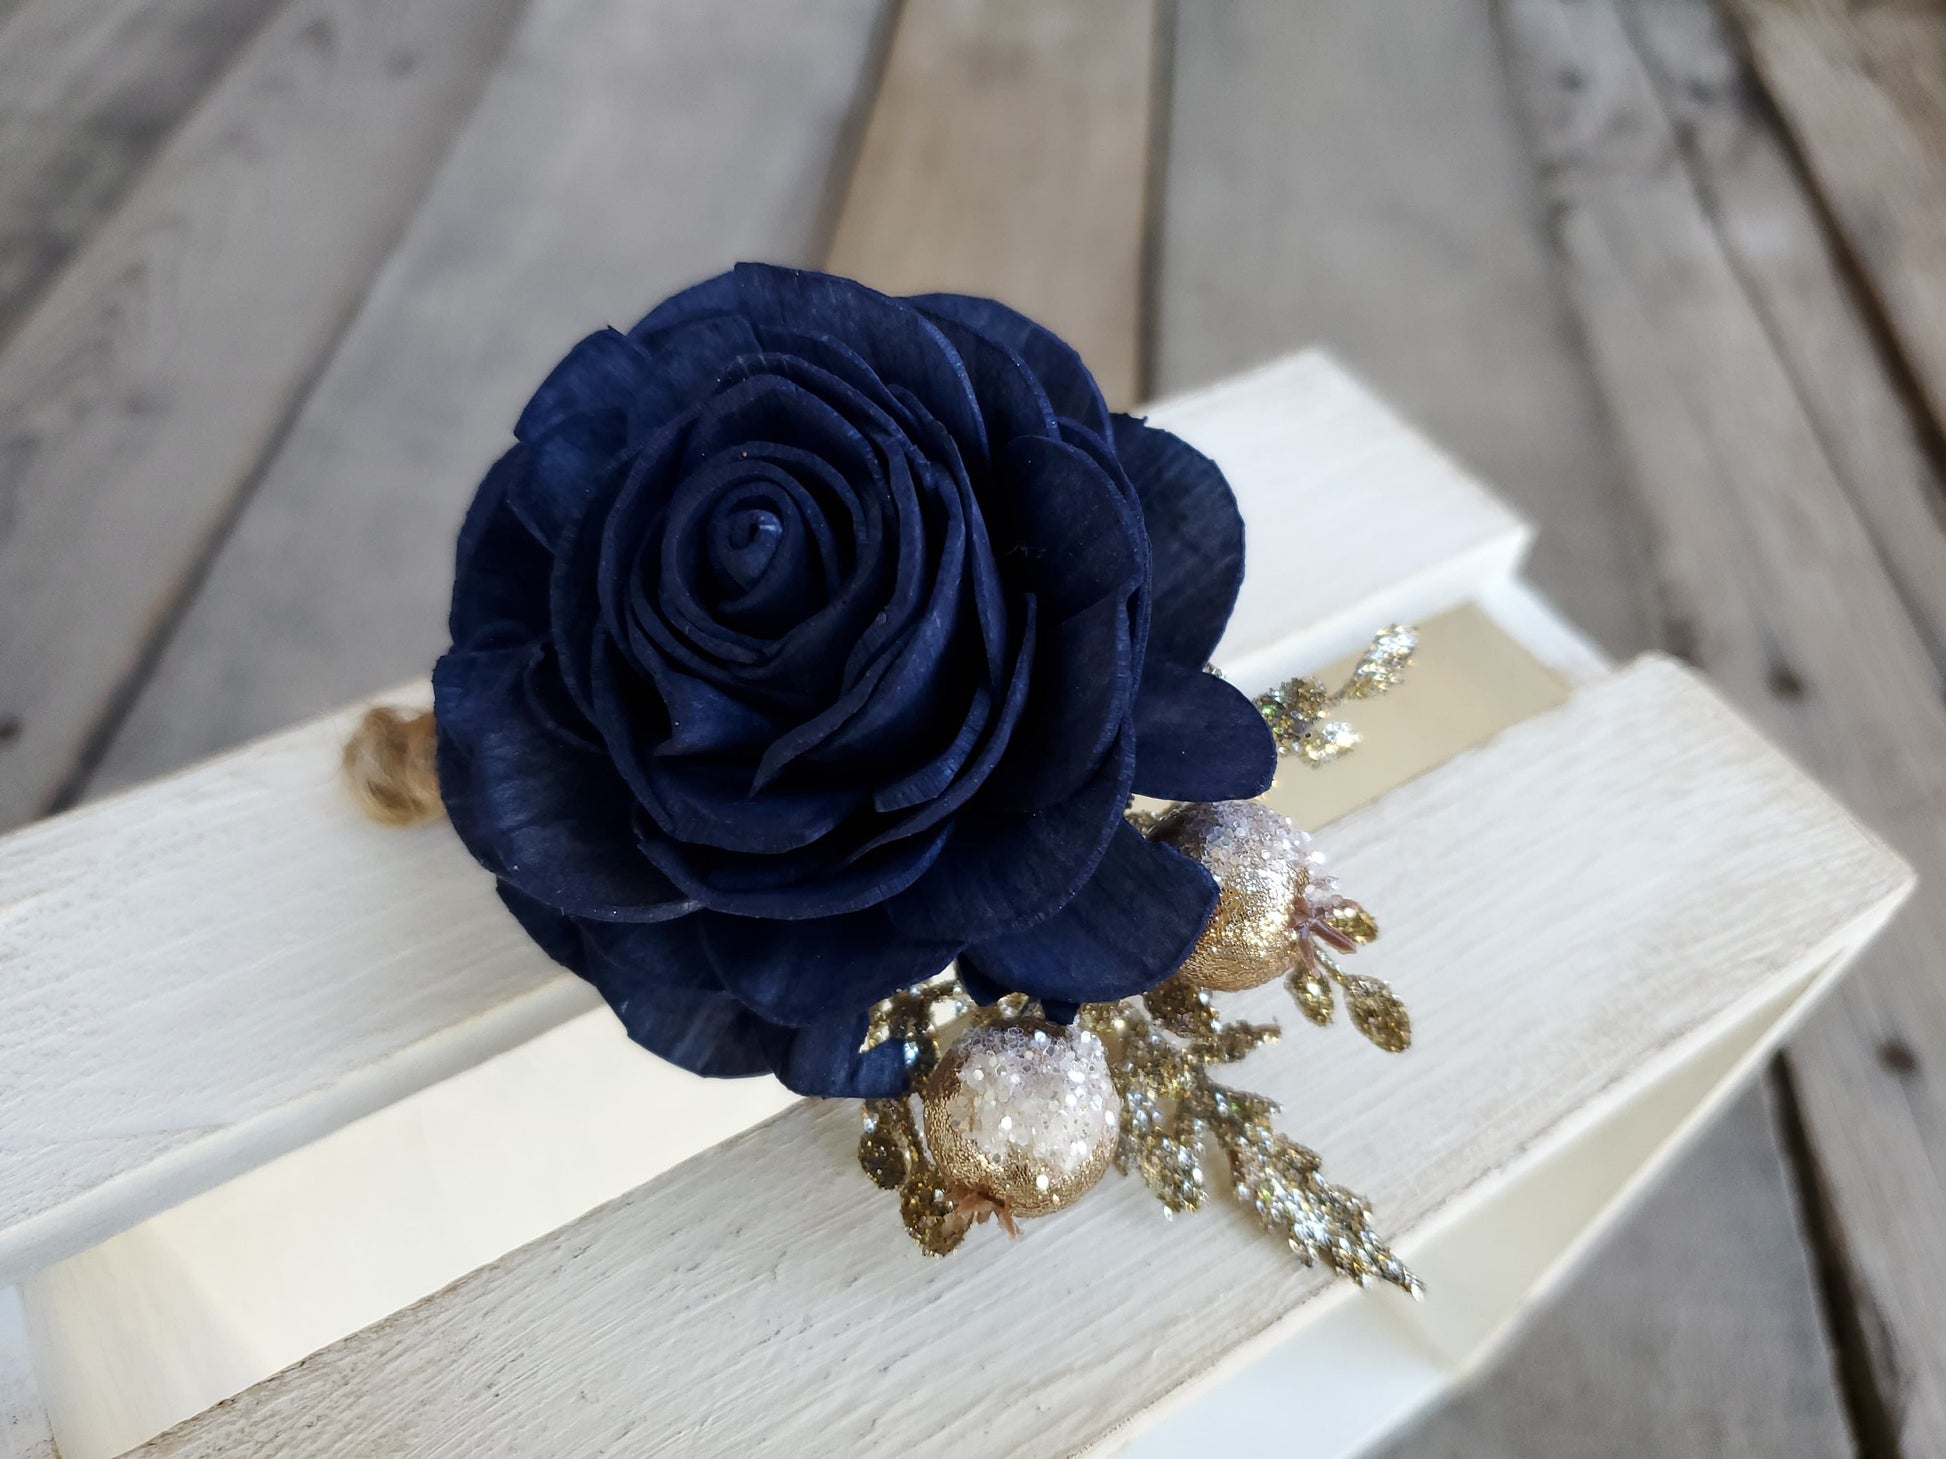 Wood Flower Boutonniere for Groom, Groomsmen Boutonnieres, Father of the Bride Boutonniere, Pinned Flower Lapel Pin